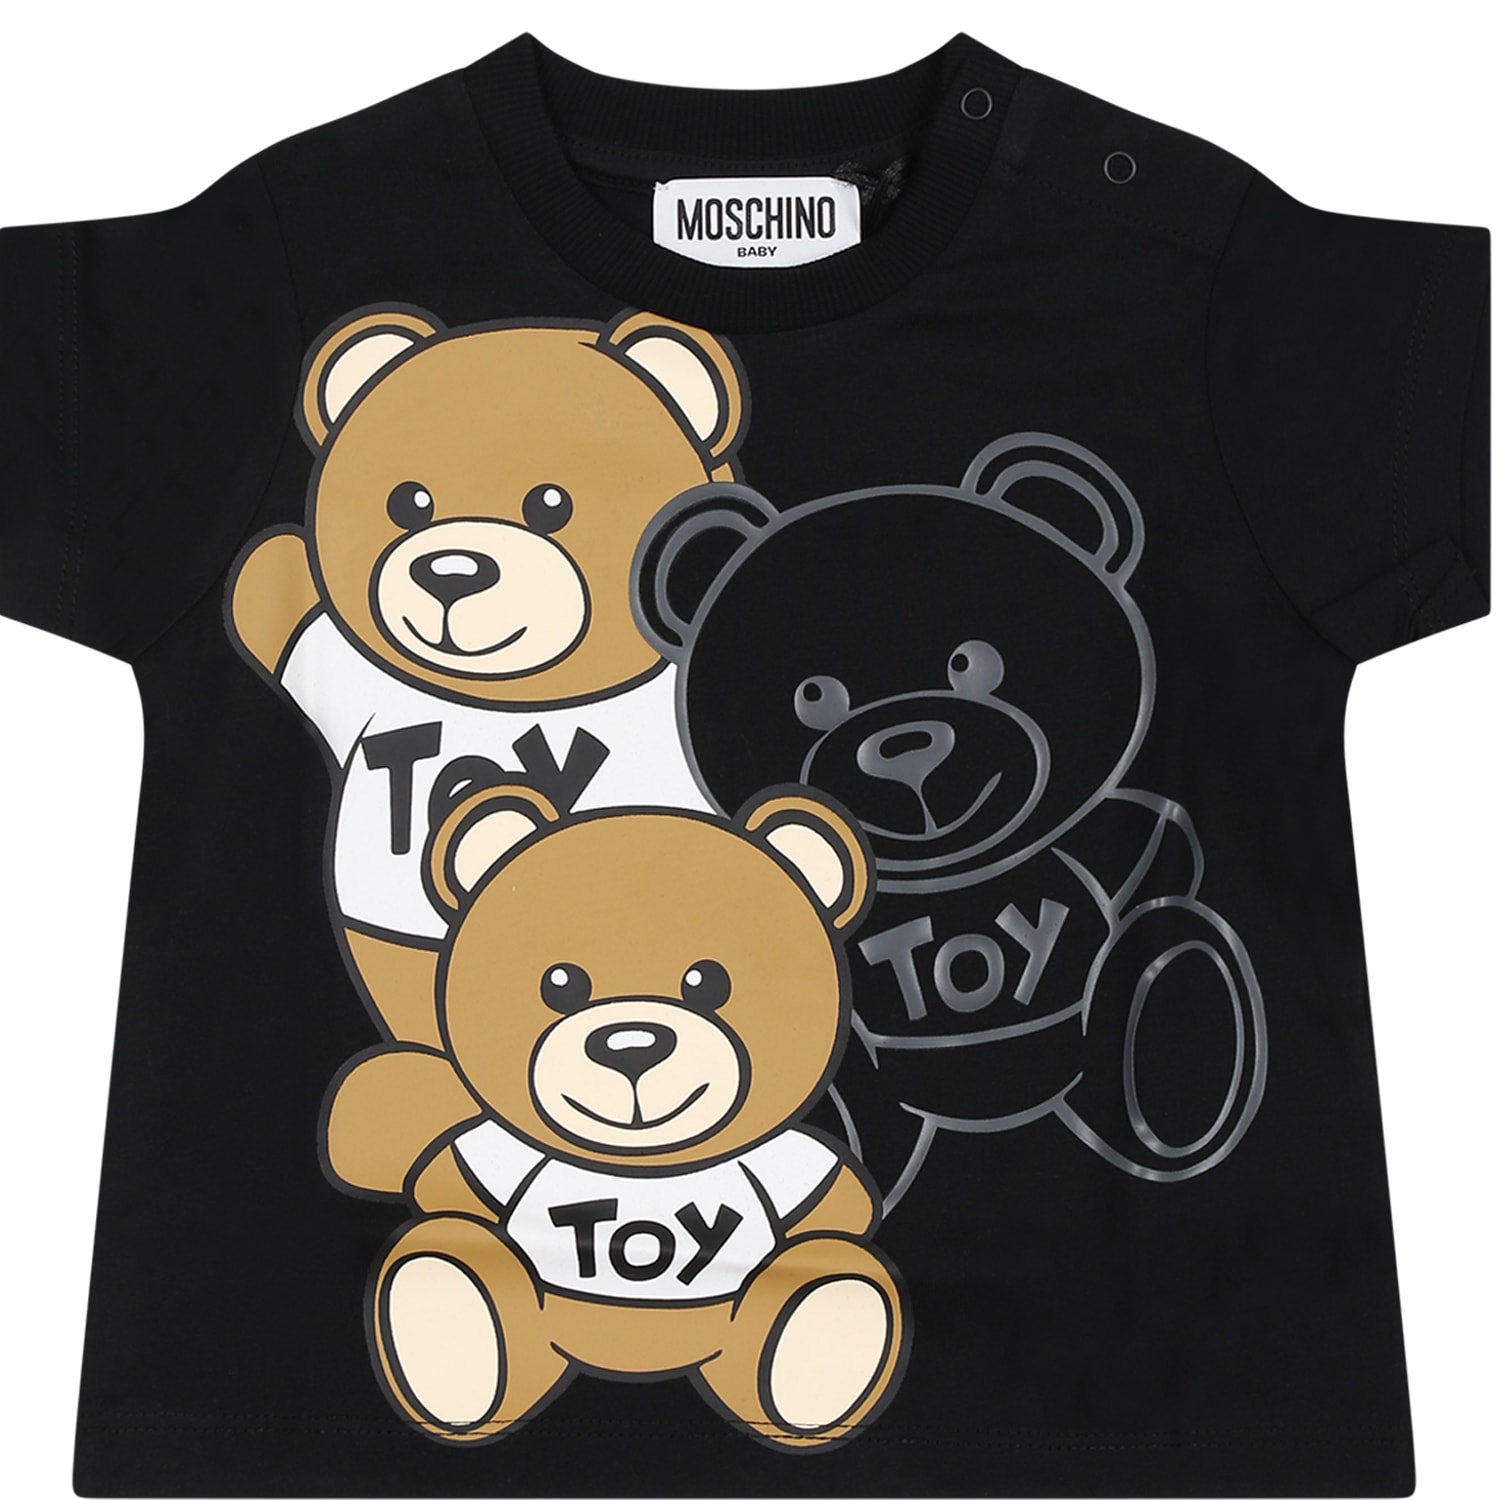 MOSCHINO BLACK T-SHIRT FOR BABY BOY WITH TEDDY BEARS